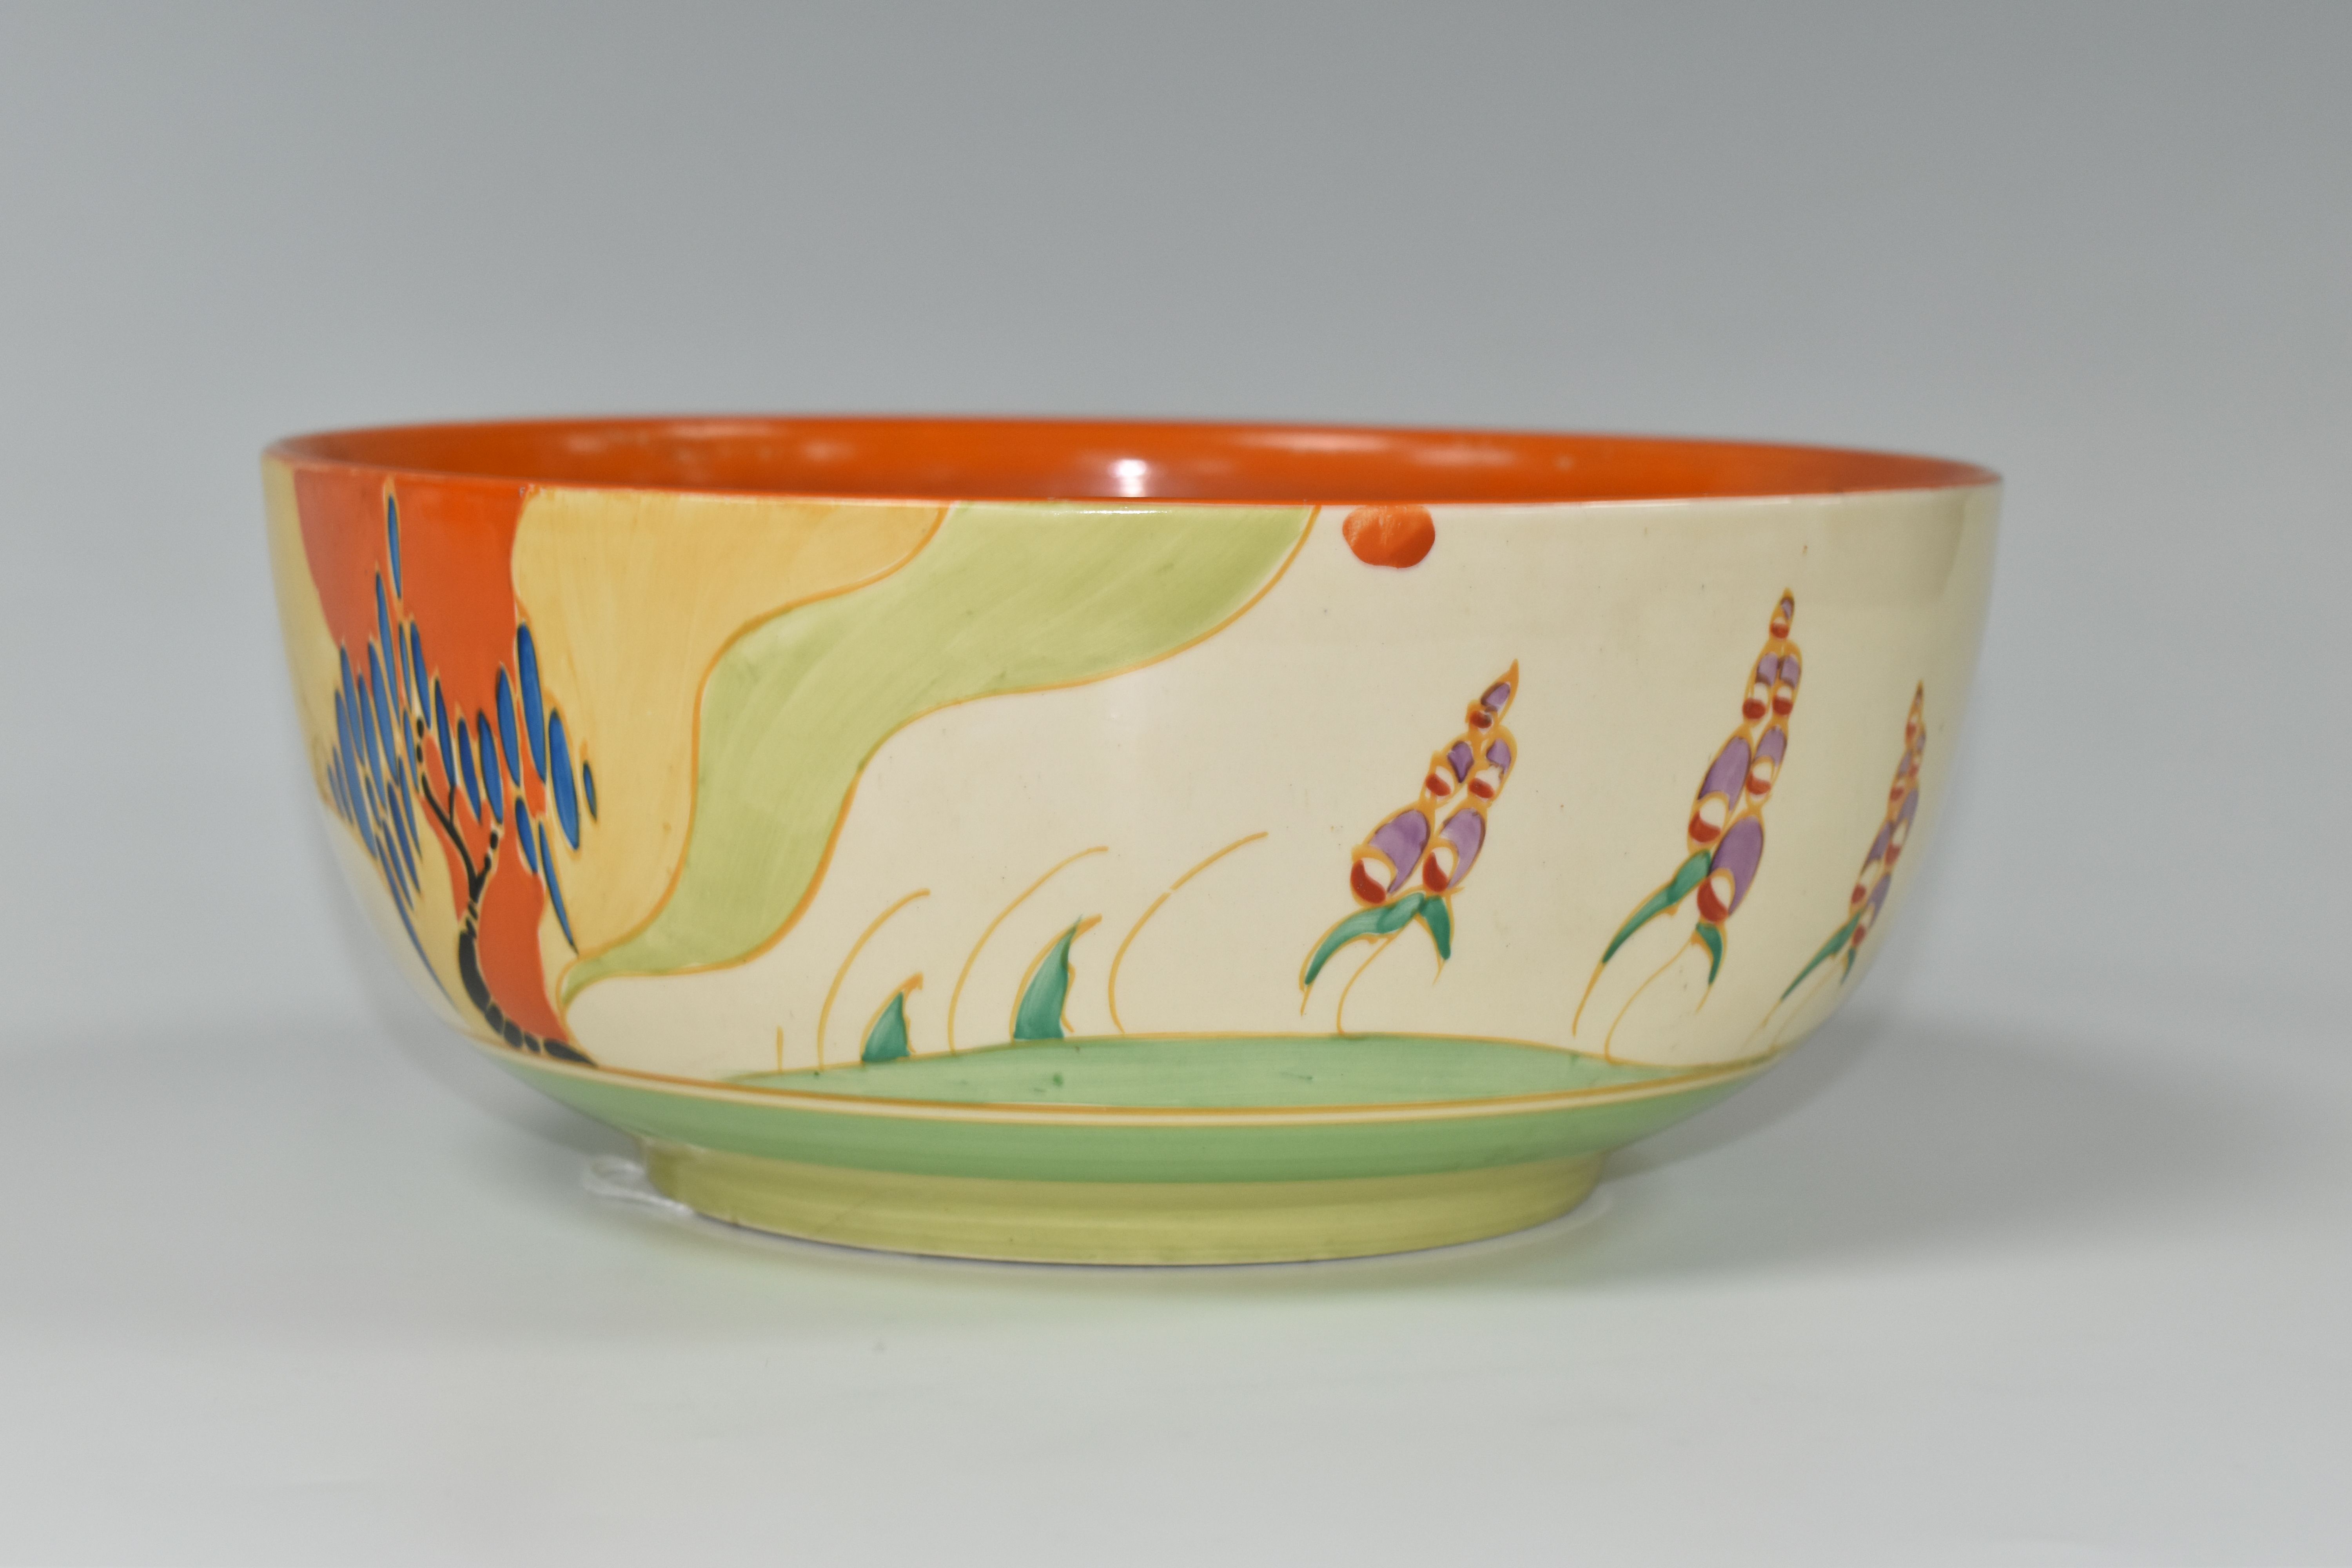 A CLARICE CLIFF 'WINDBELLS' DESIGN BOWL, with a vibrant orange, yellow, green and cream banding on - Image 3 of 7